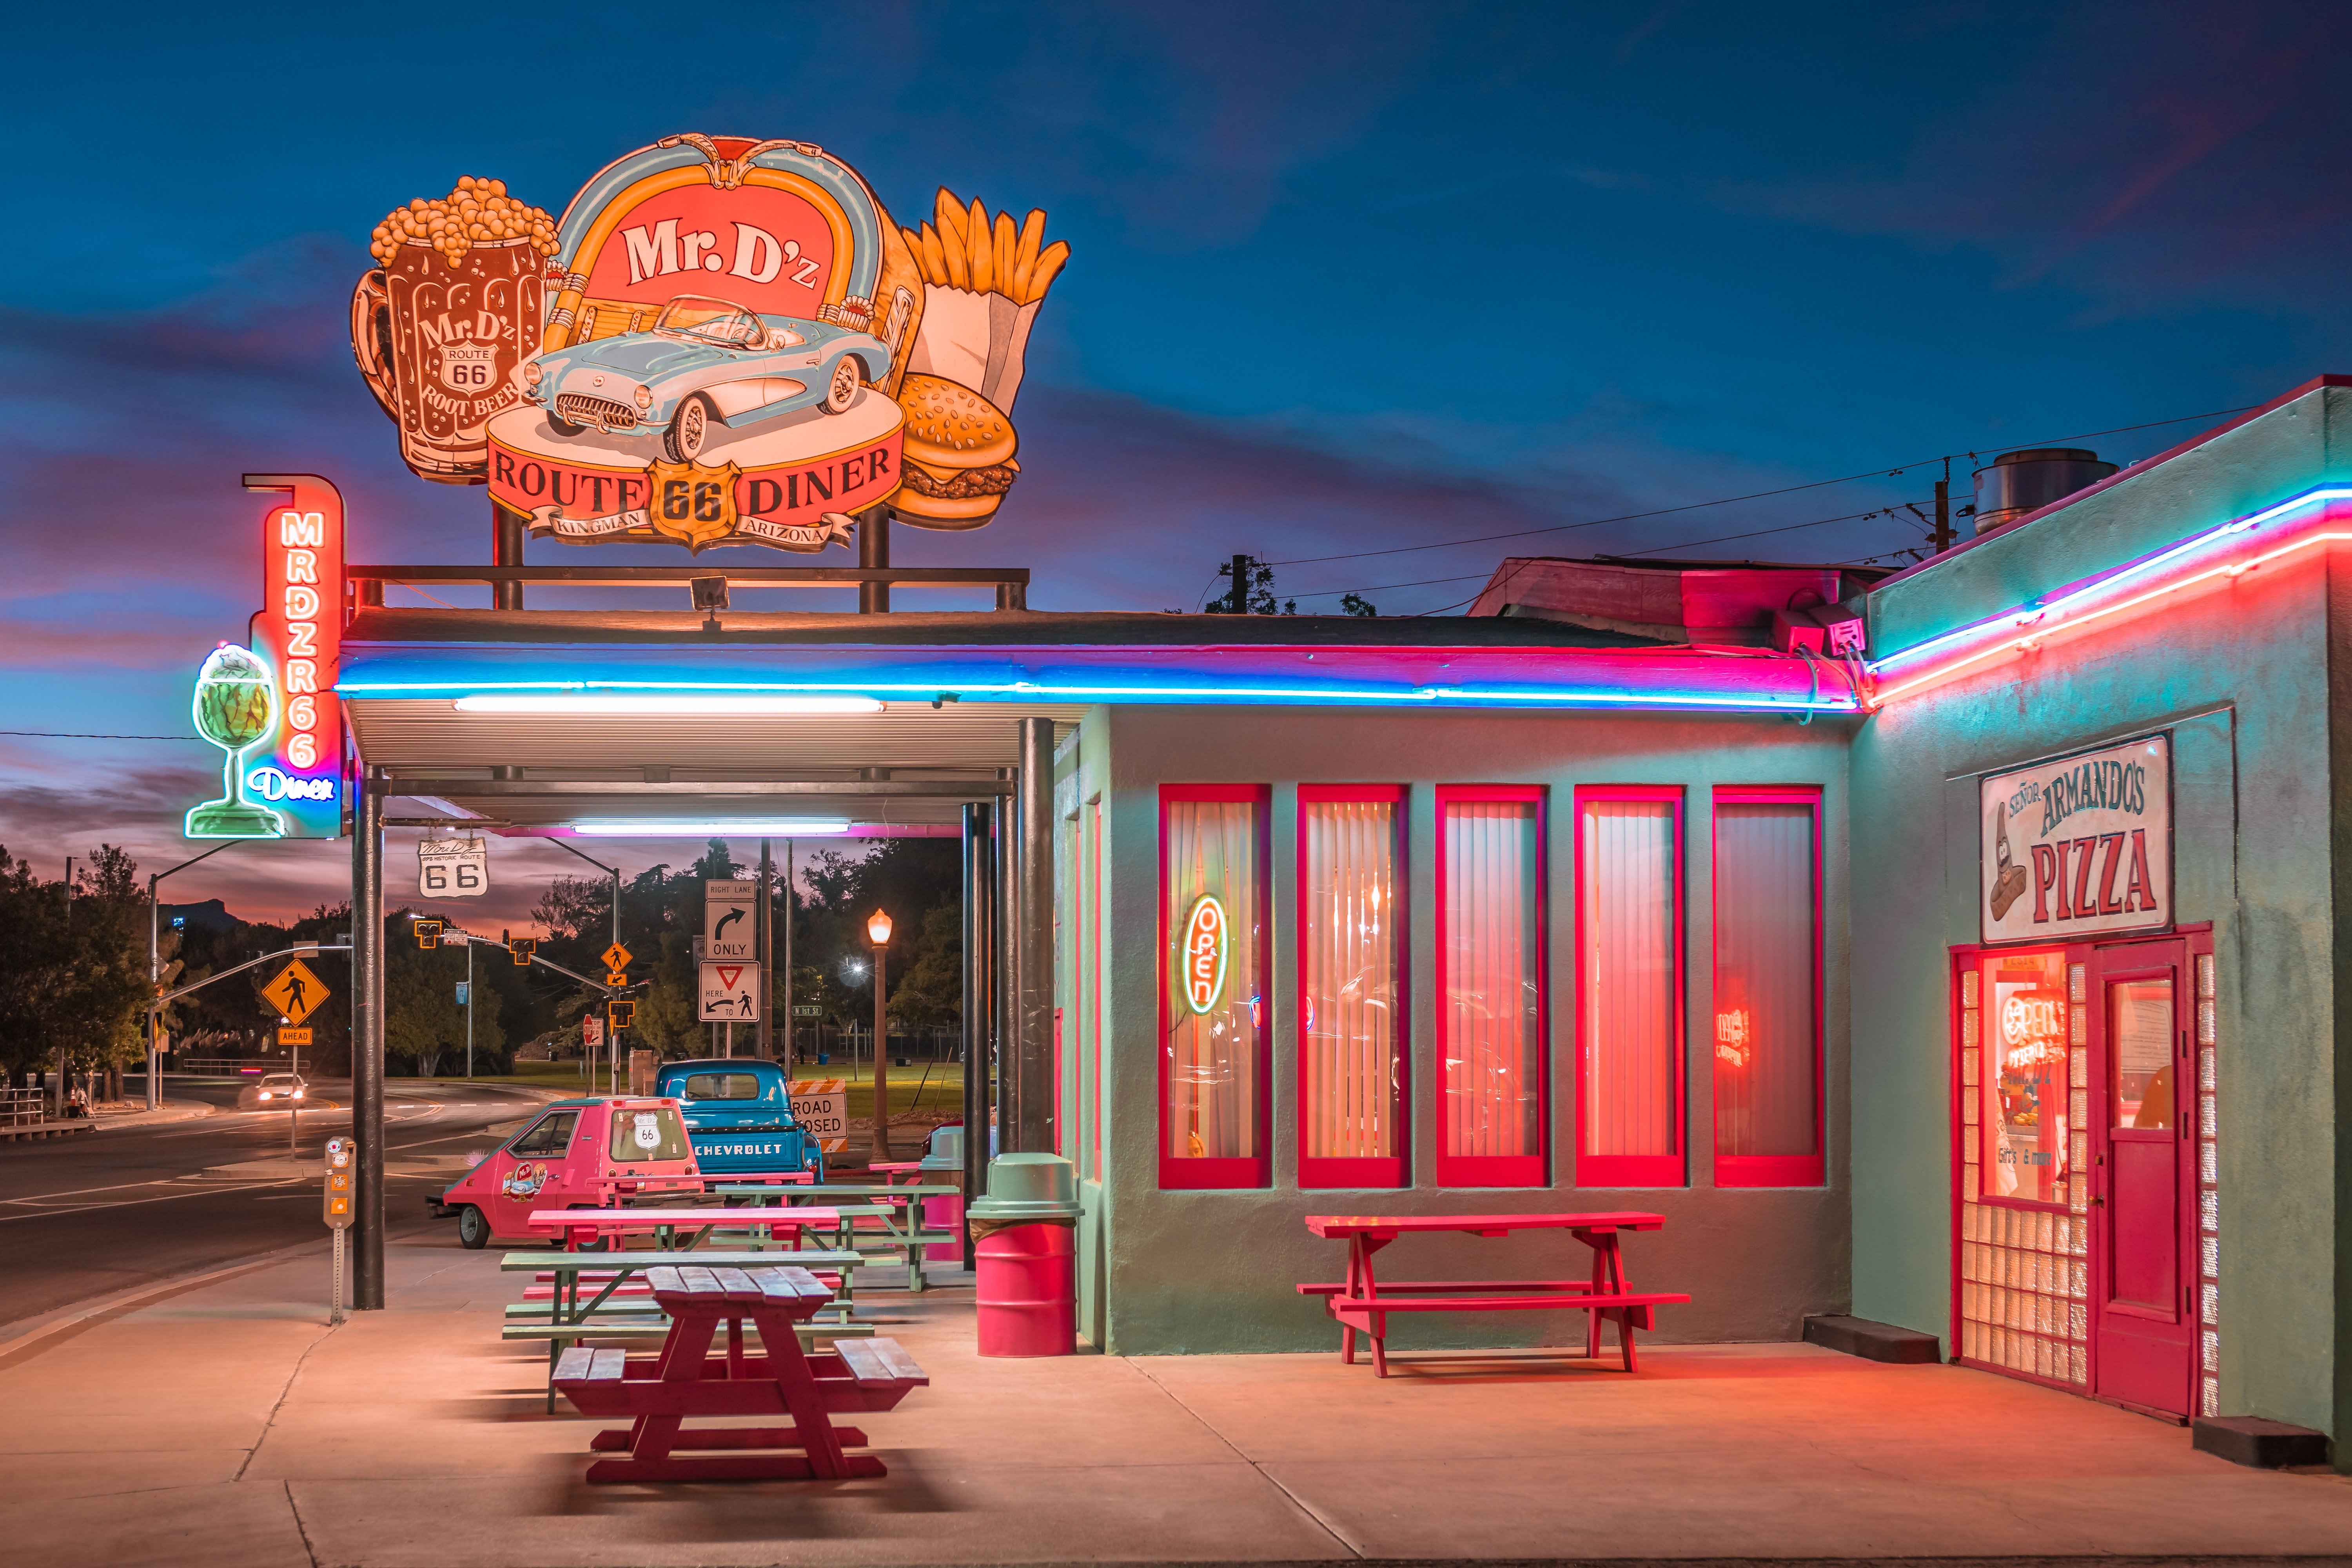 Opens 24 hours in a day, Mr D's serves classic American comfort food.